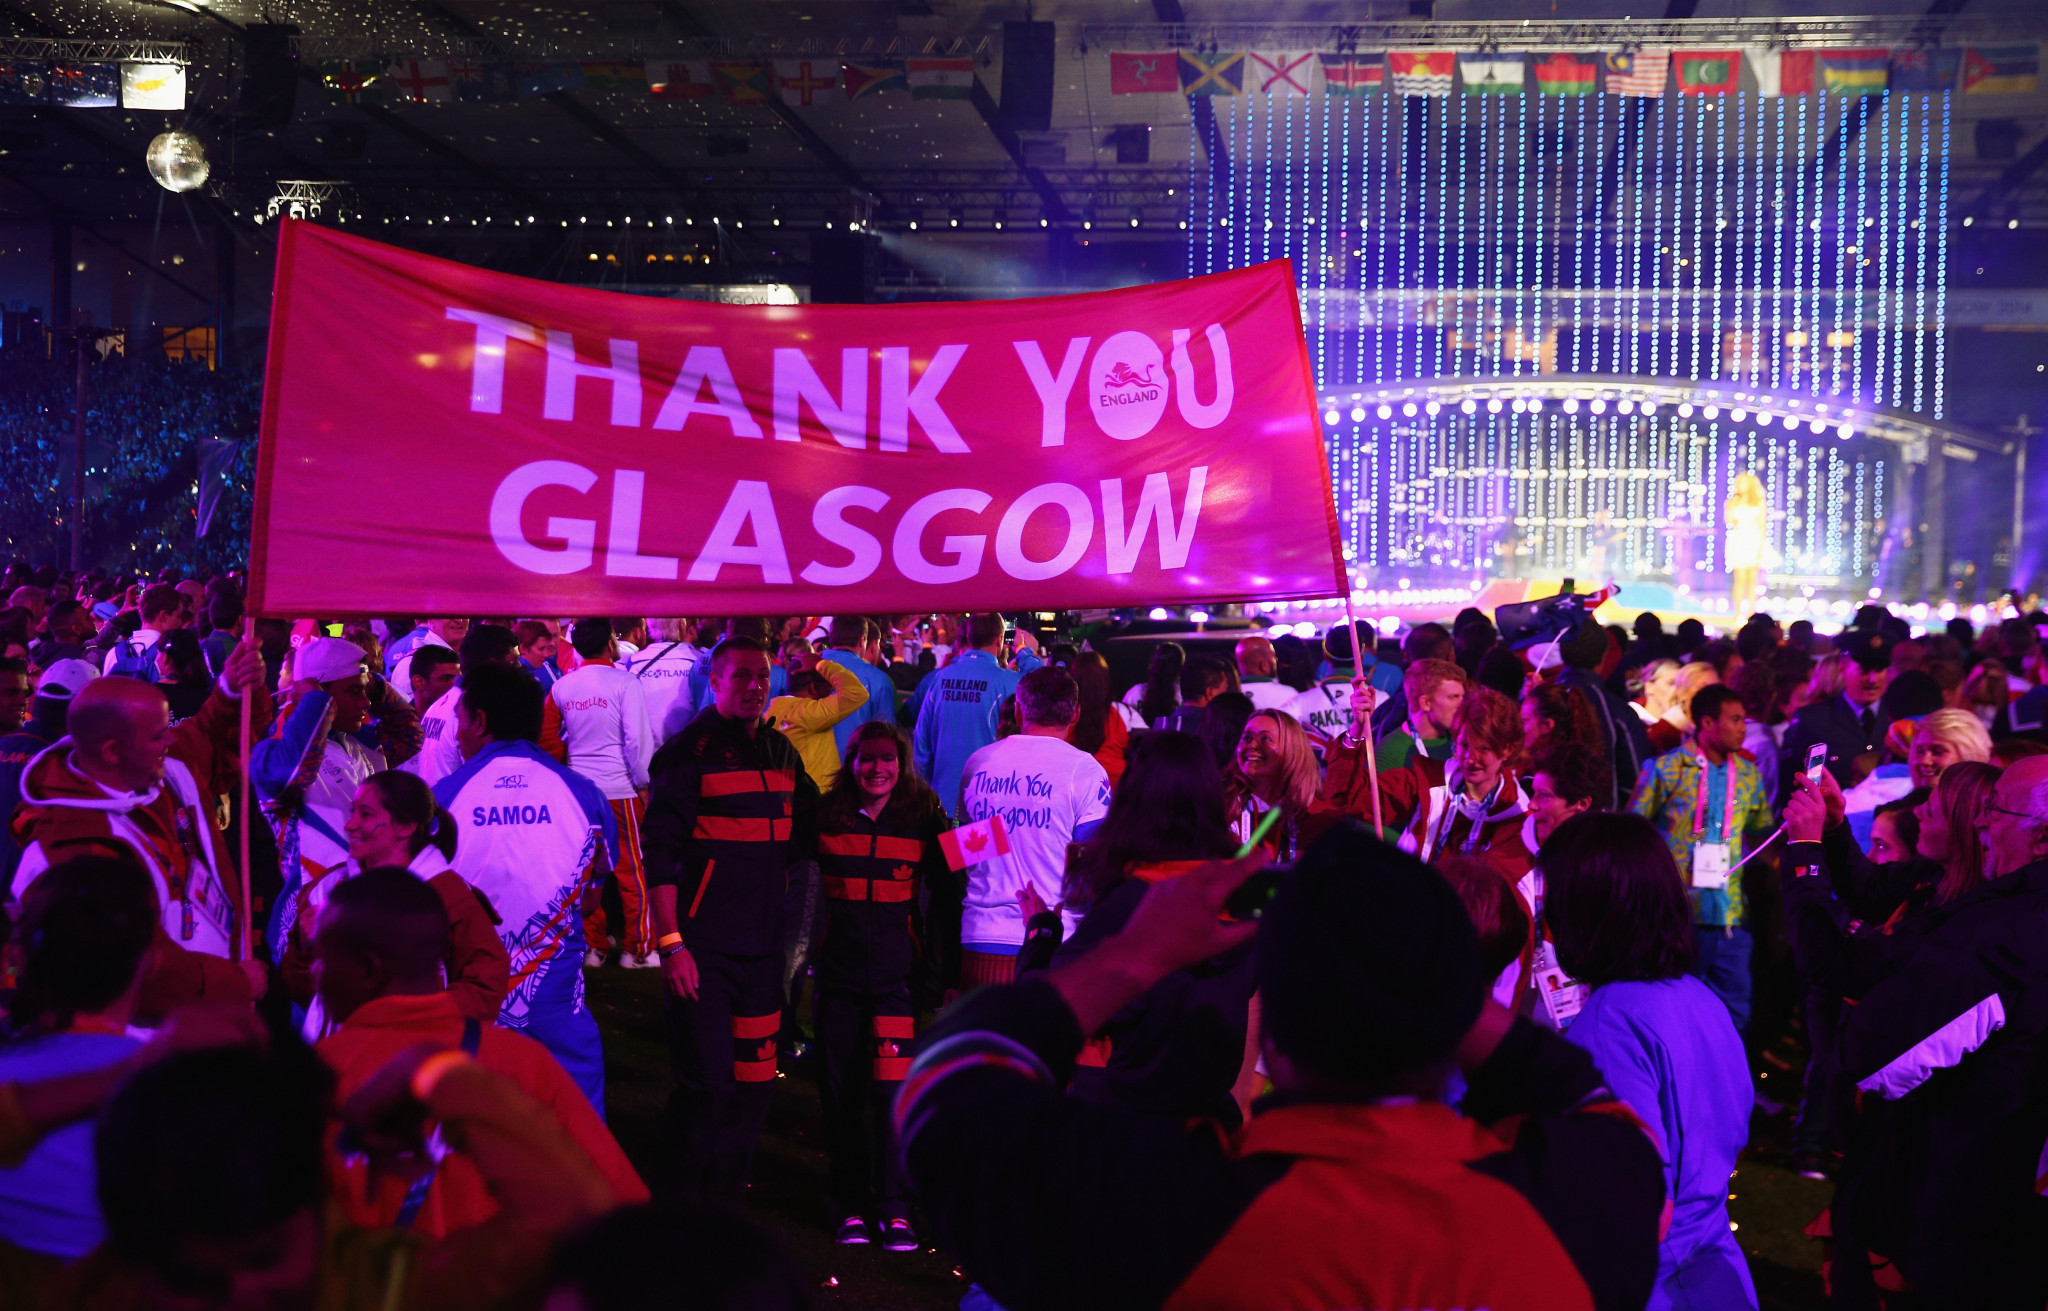 Glasgow hosted the Commonwealth Games in 2014 which resulted in long-lasting legacy benefits ©Getty Images